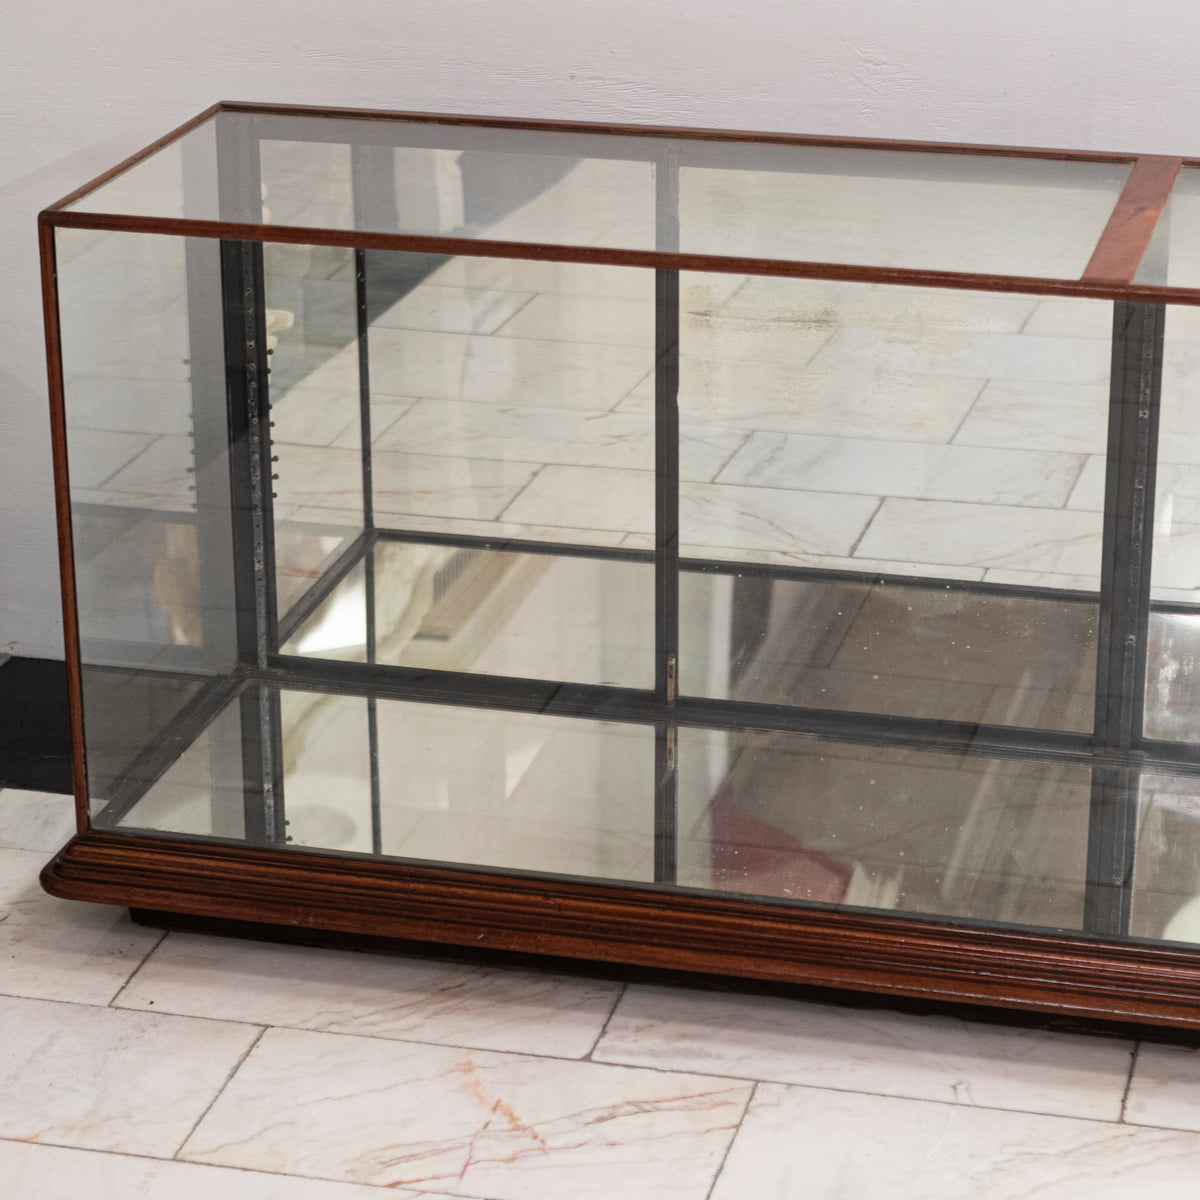 Antique Victorian Mahogany Shop Counter | Display Cabinet | The Architectural Forum